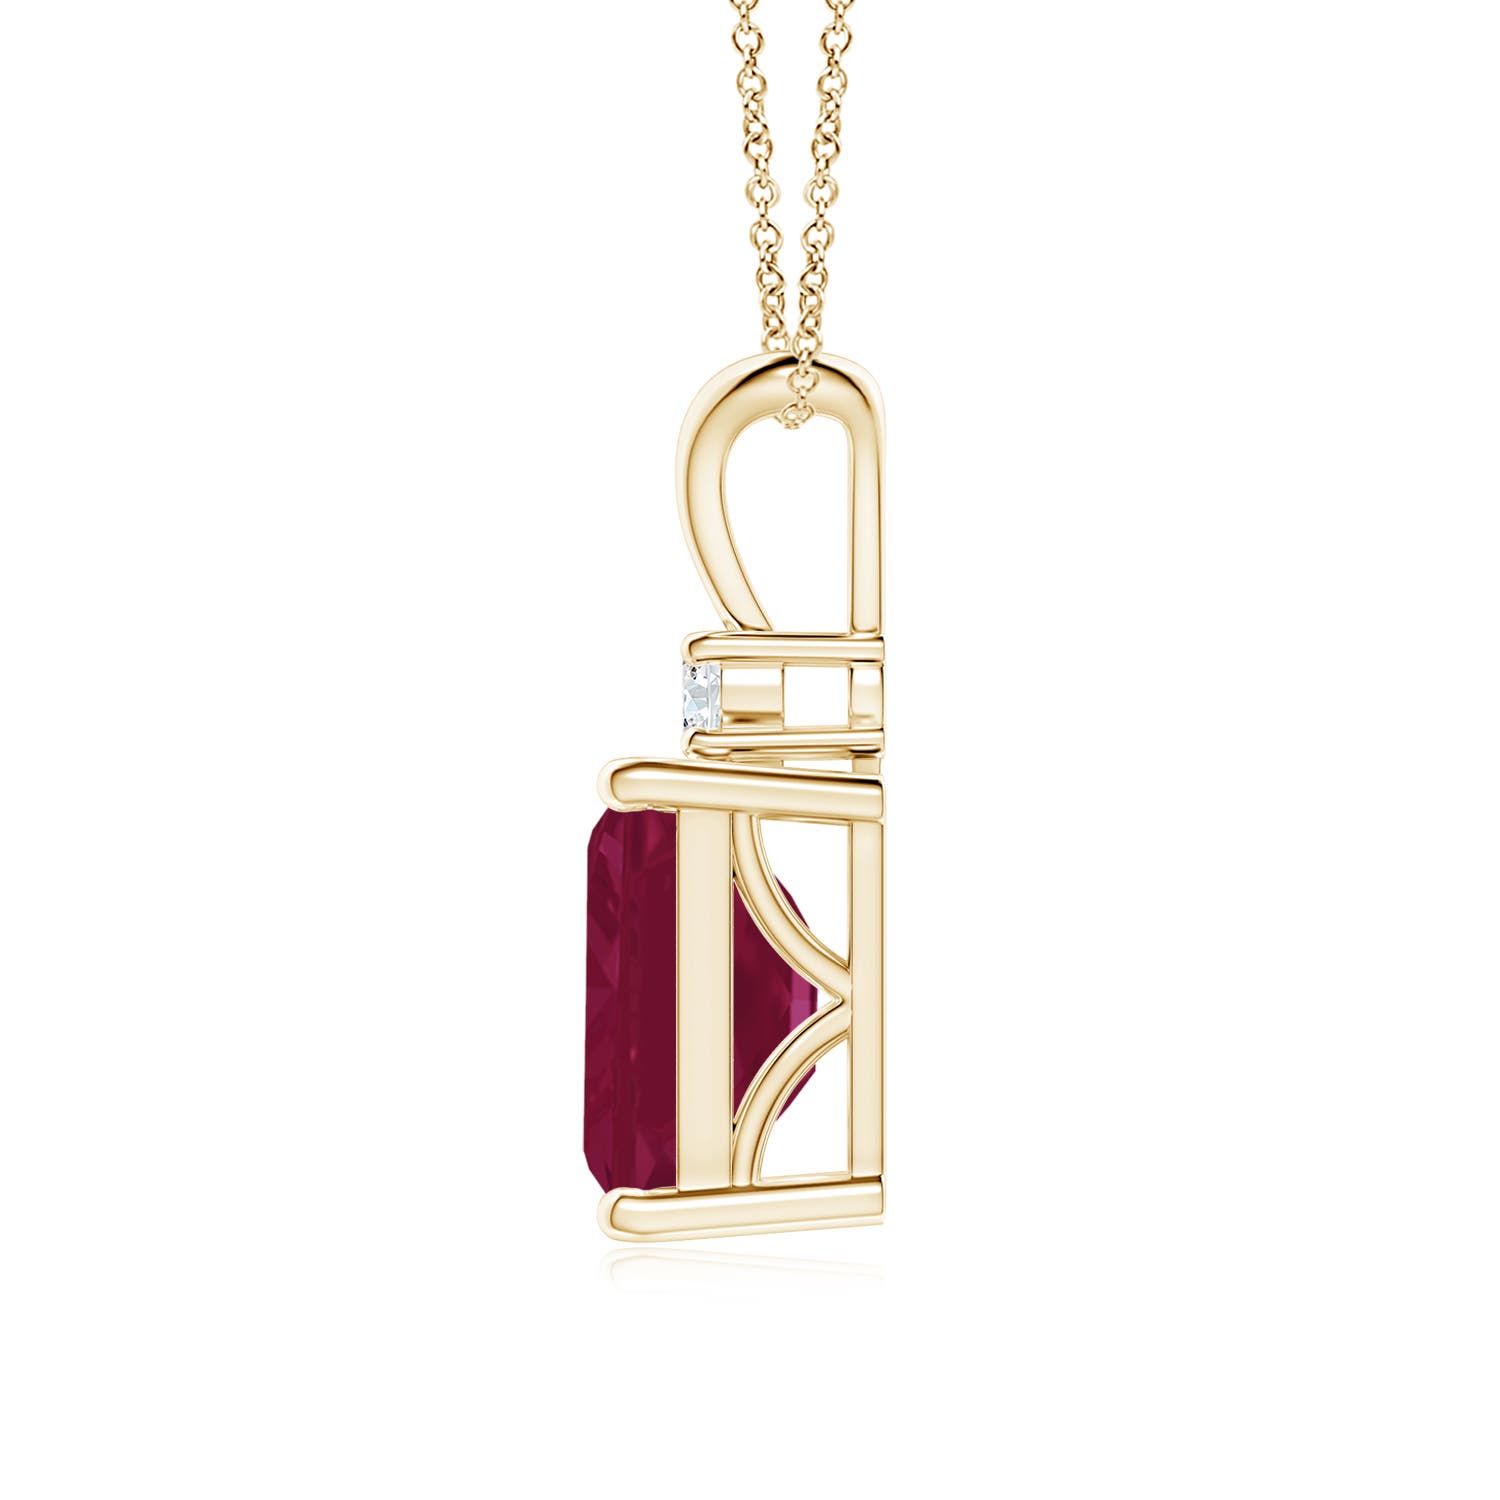 A - Ruby / 3.07 CT / 14 KT Yellow Gold